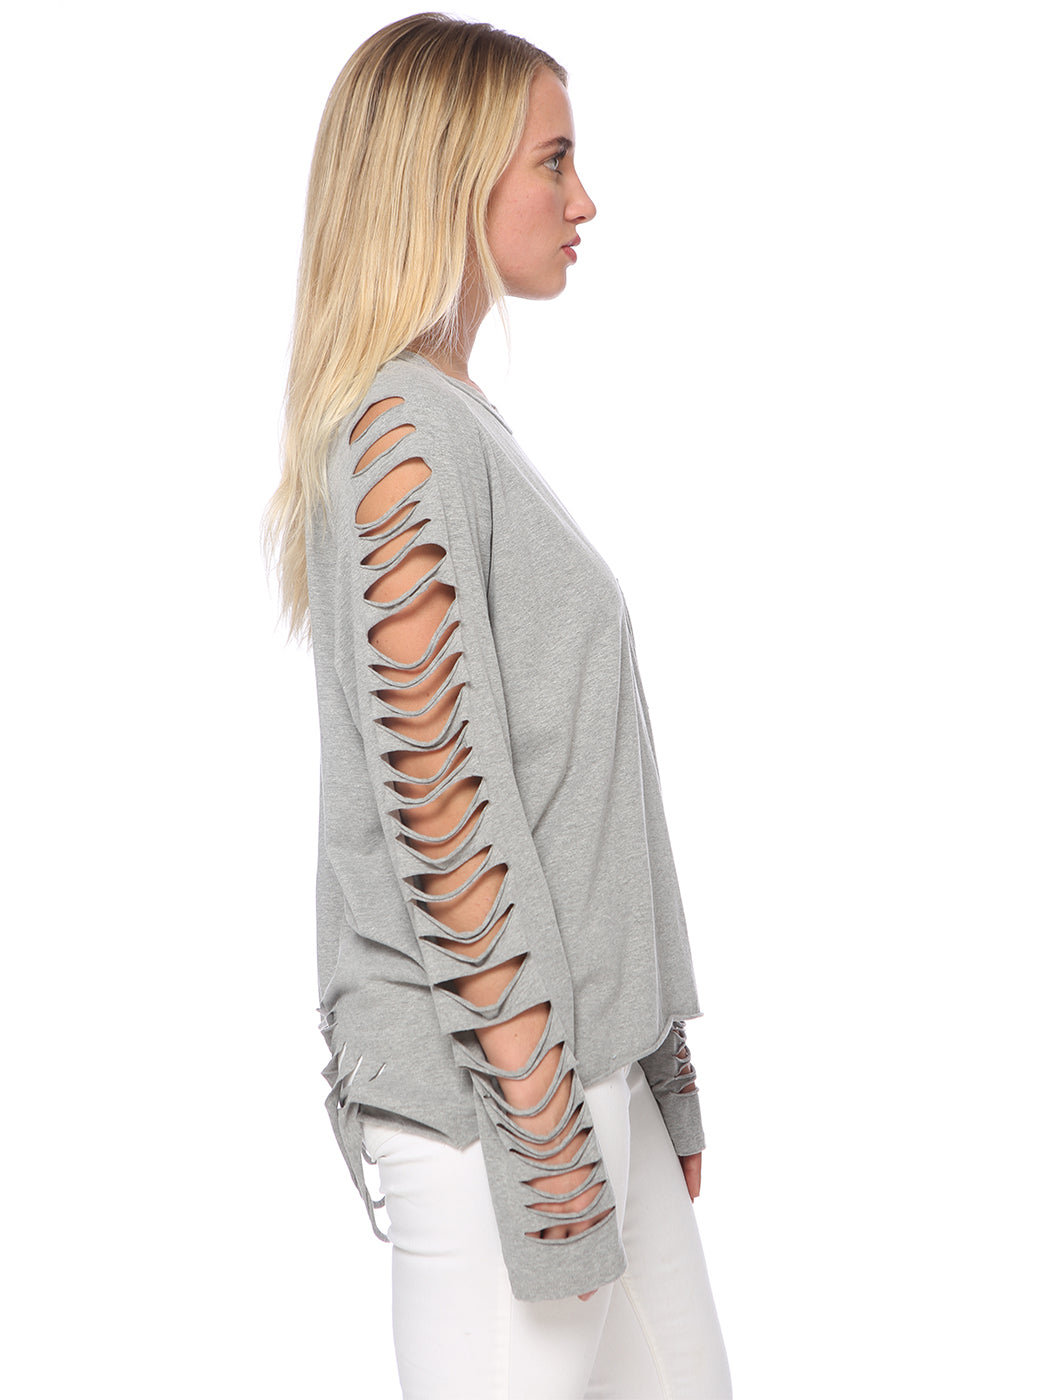 Ripped Long-Sleeve Pullover Top